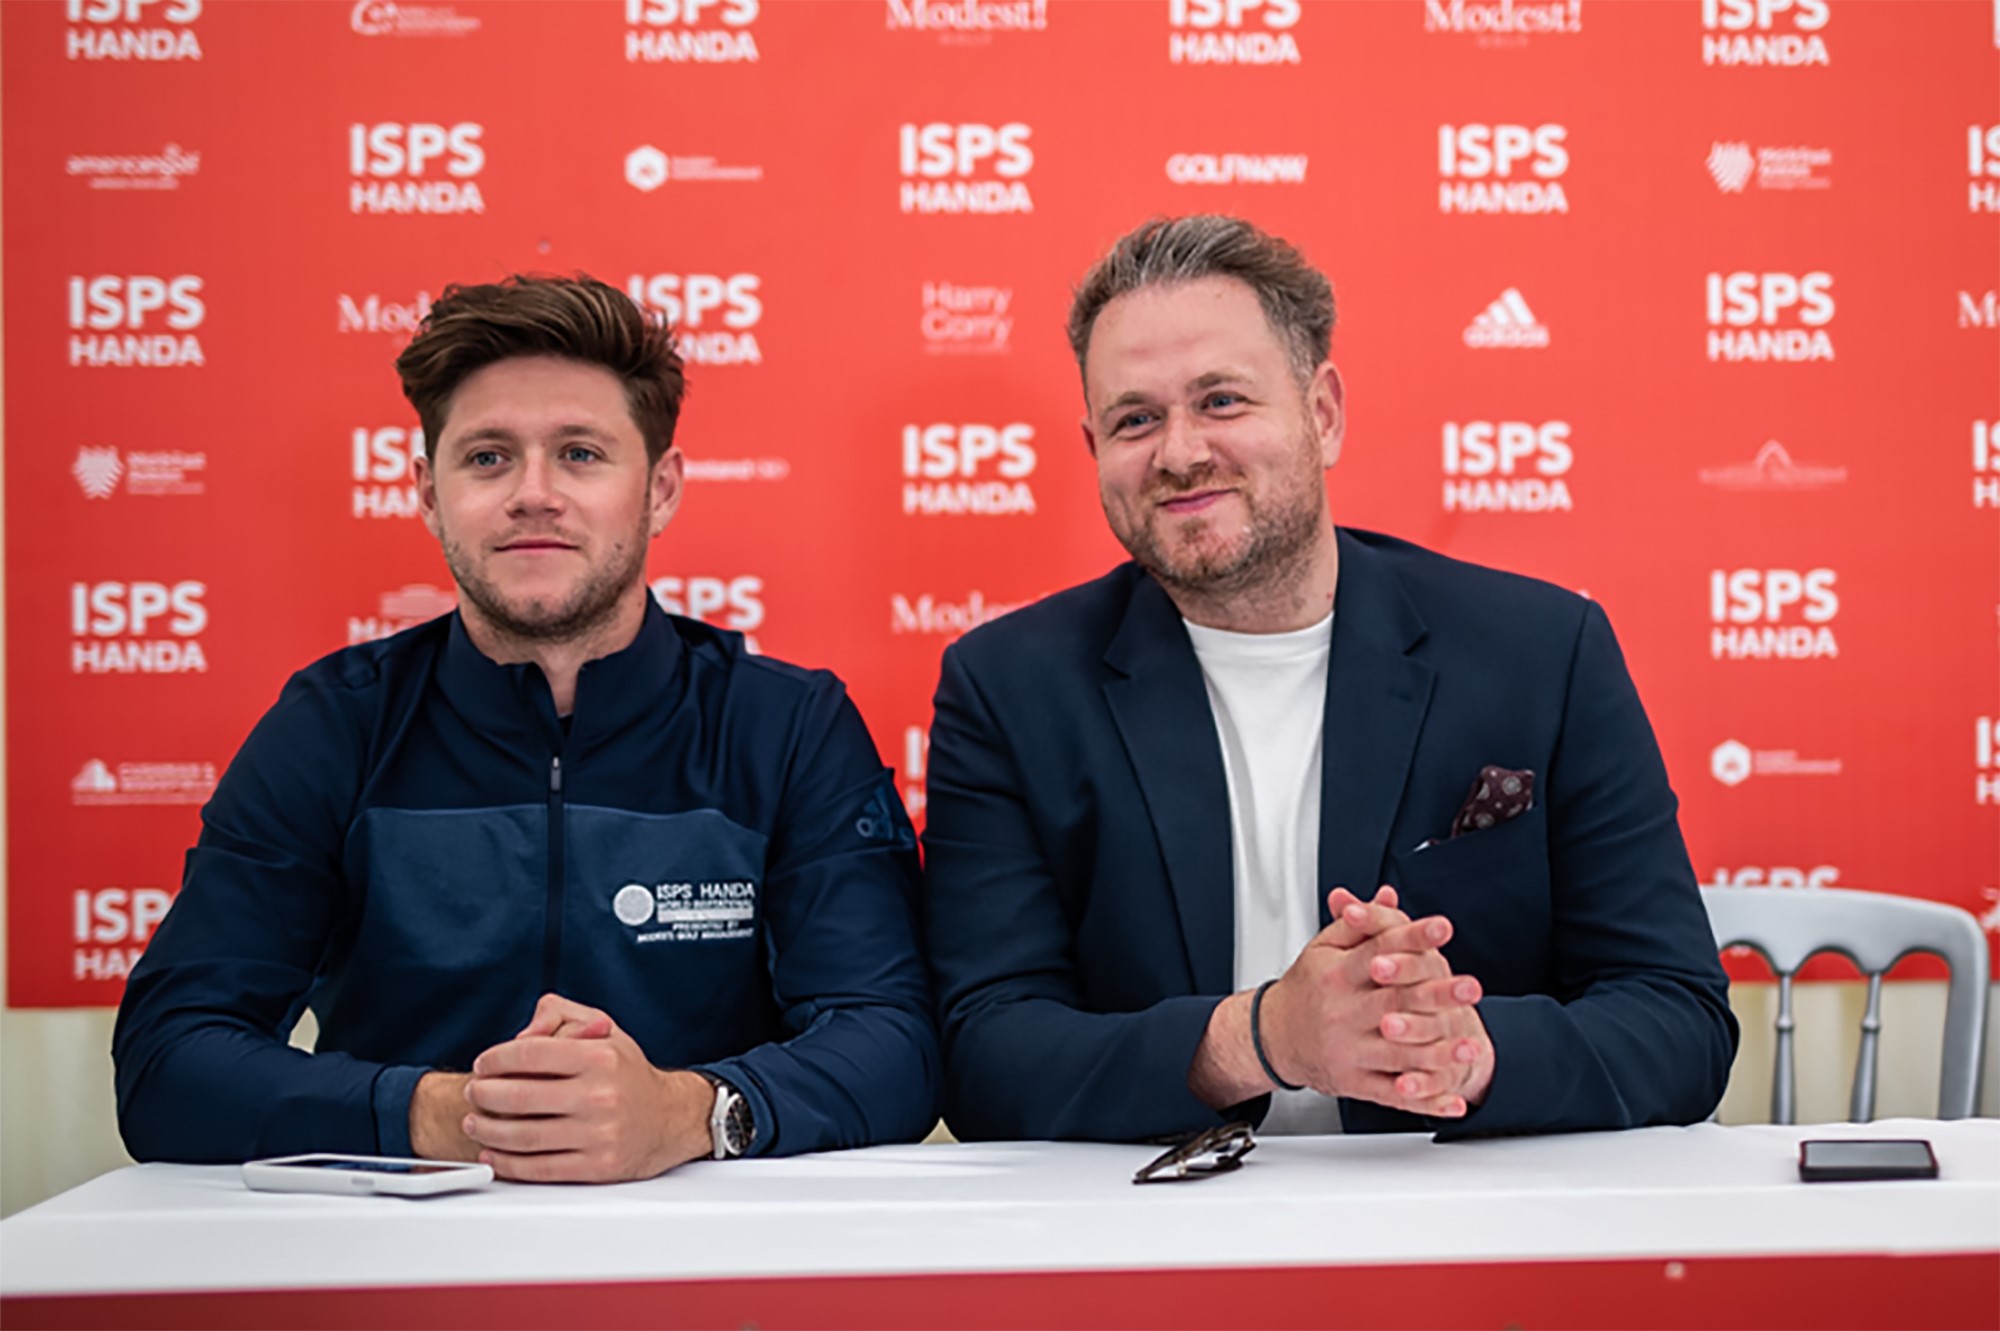 Modest! Golf’s Niall Horan and Mark McDonnell during the ISPS Handa World Invitational at Galgorm, Northern Ireland